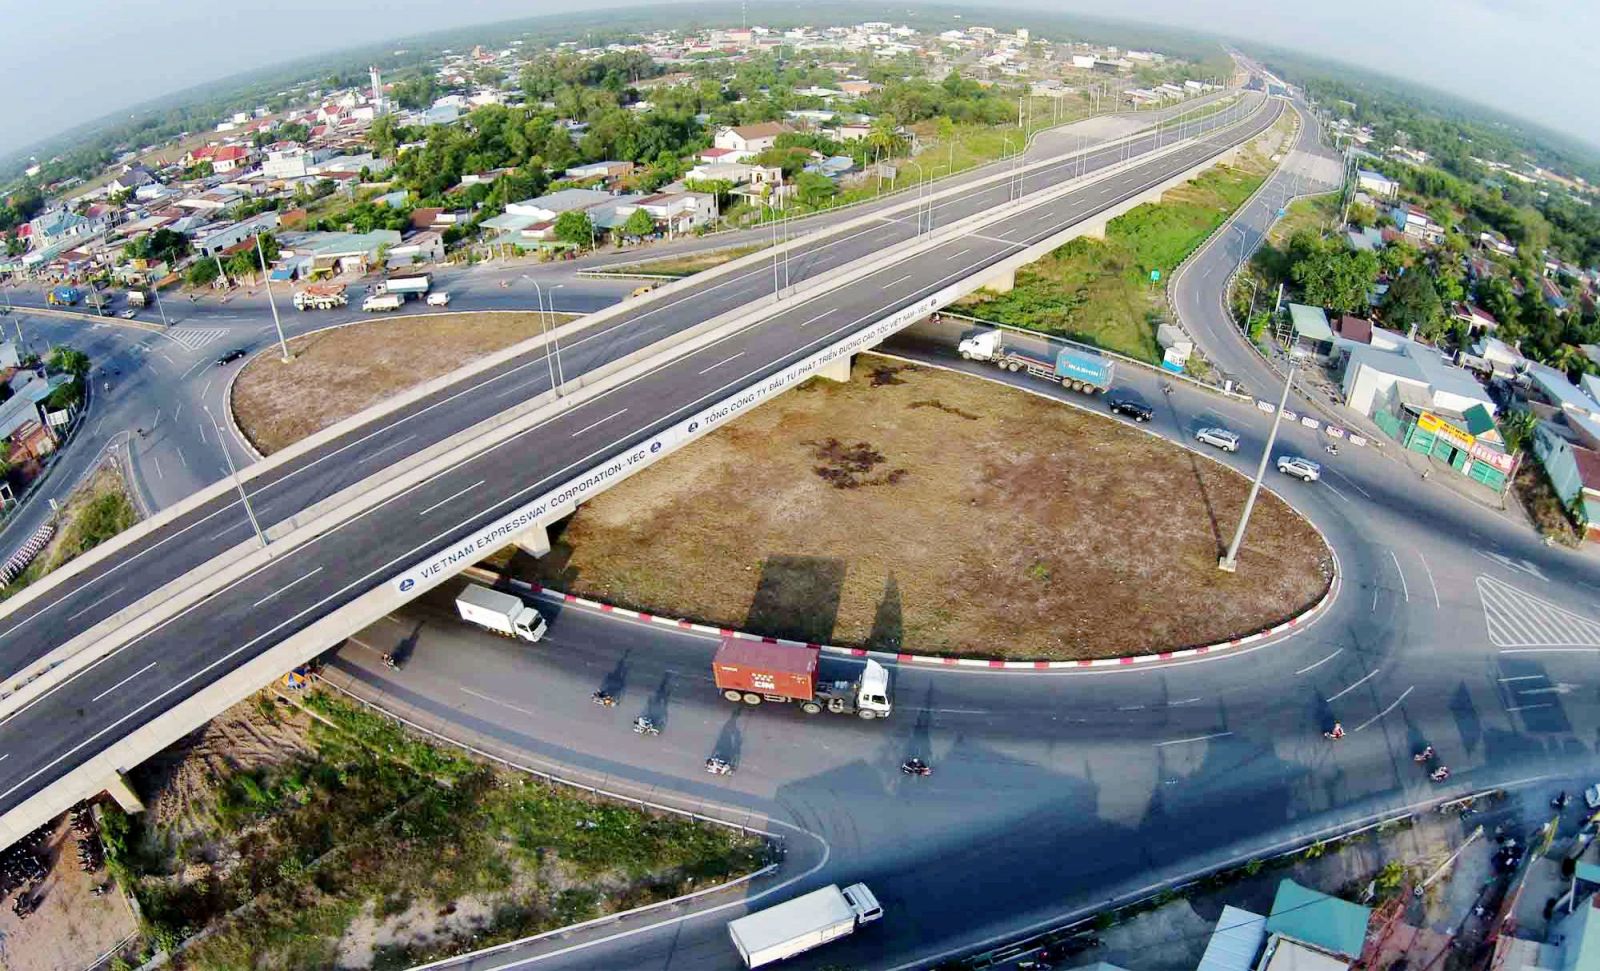 A section of the North-South expressway. (Photo: Vietnamnet)